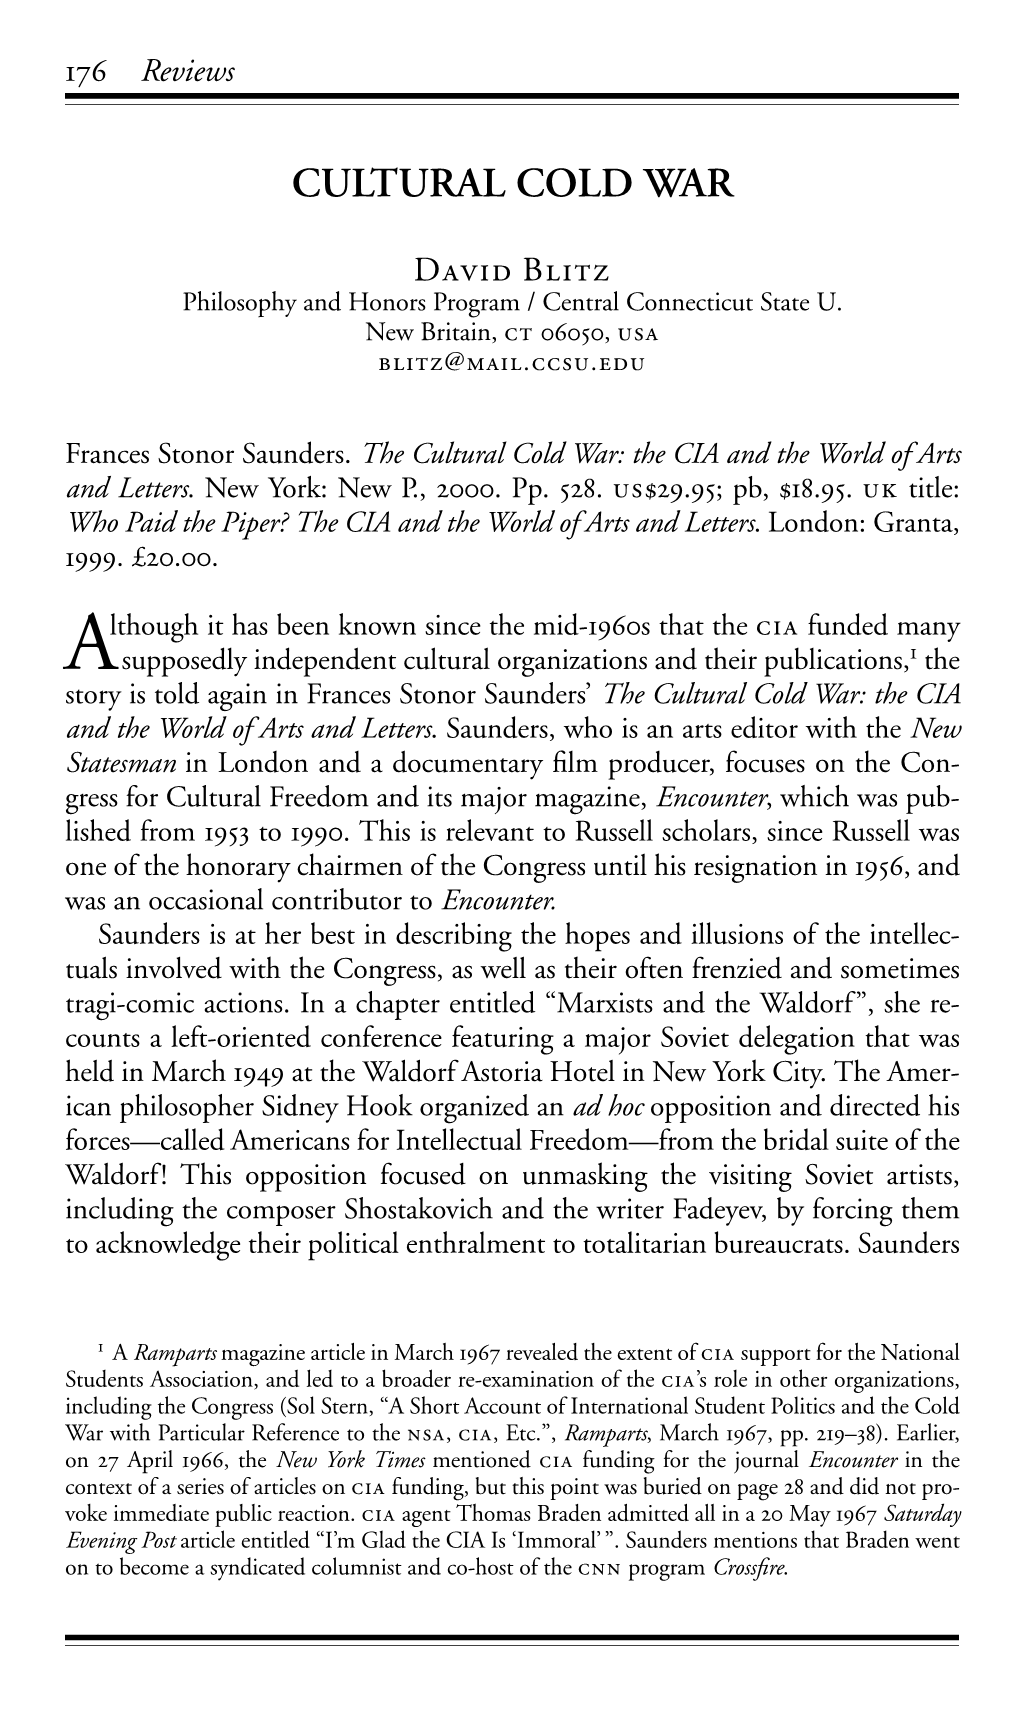 Cultural Cold War [Review of Frances Stonor Saunders, the Cultural Cold